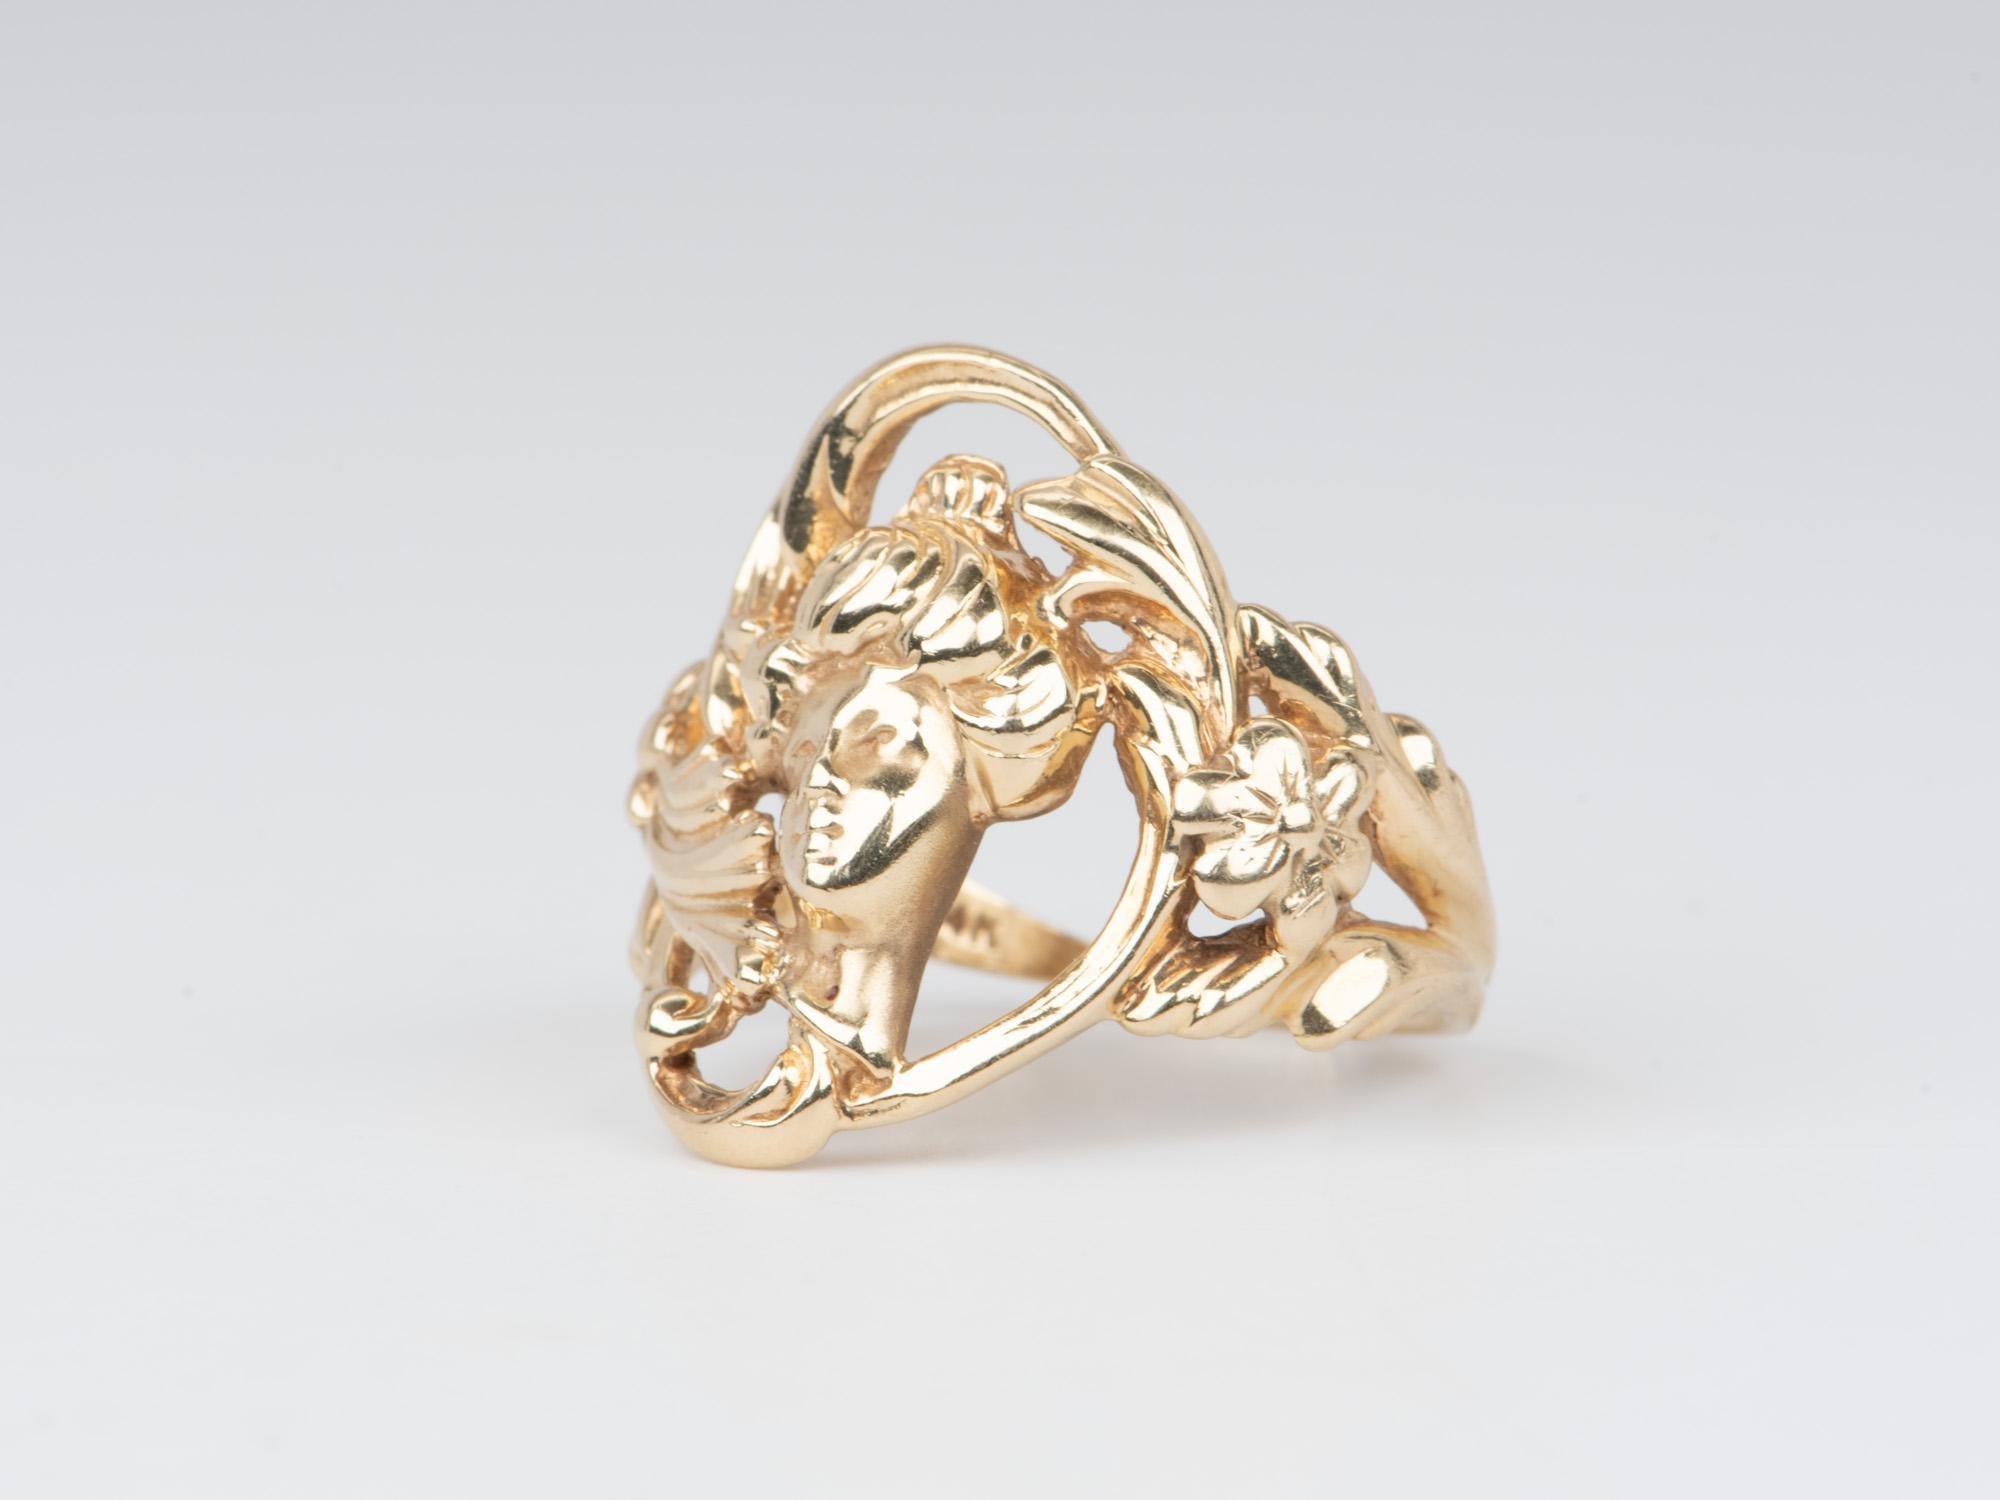 ♥ Vintage Jewelry Art Nouveau Floral Woman Ring 14K Gold 7g
♥ The design measures 22.6mm in length (North South direction), 22.1mm in width (East West direction), and sits 3.8mm tall from the finger. Band width is 1.2mm.

♥  Ring size: US 9 (Free